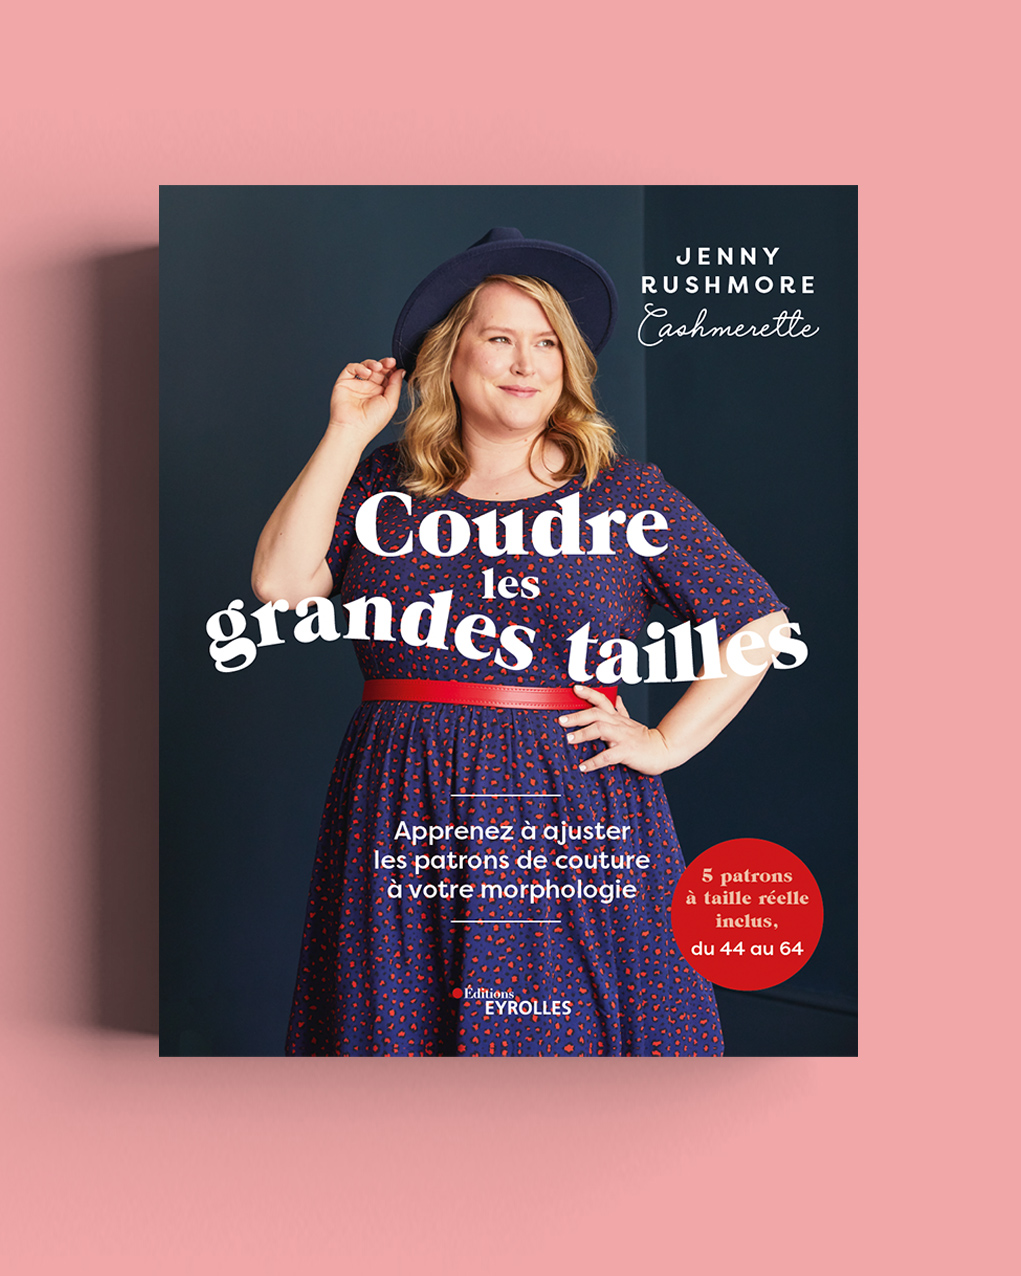 to buy "Ahead of the Curve" in French ("Coudre les grandes tailles") |